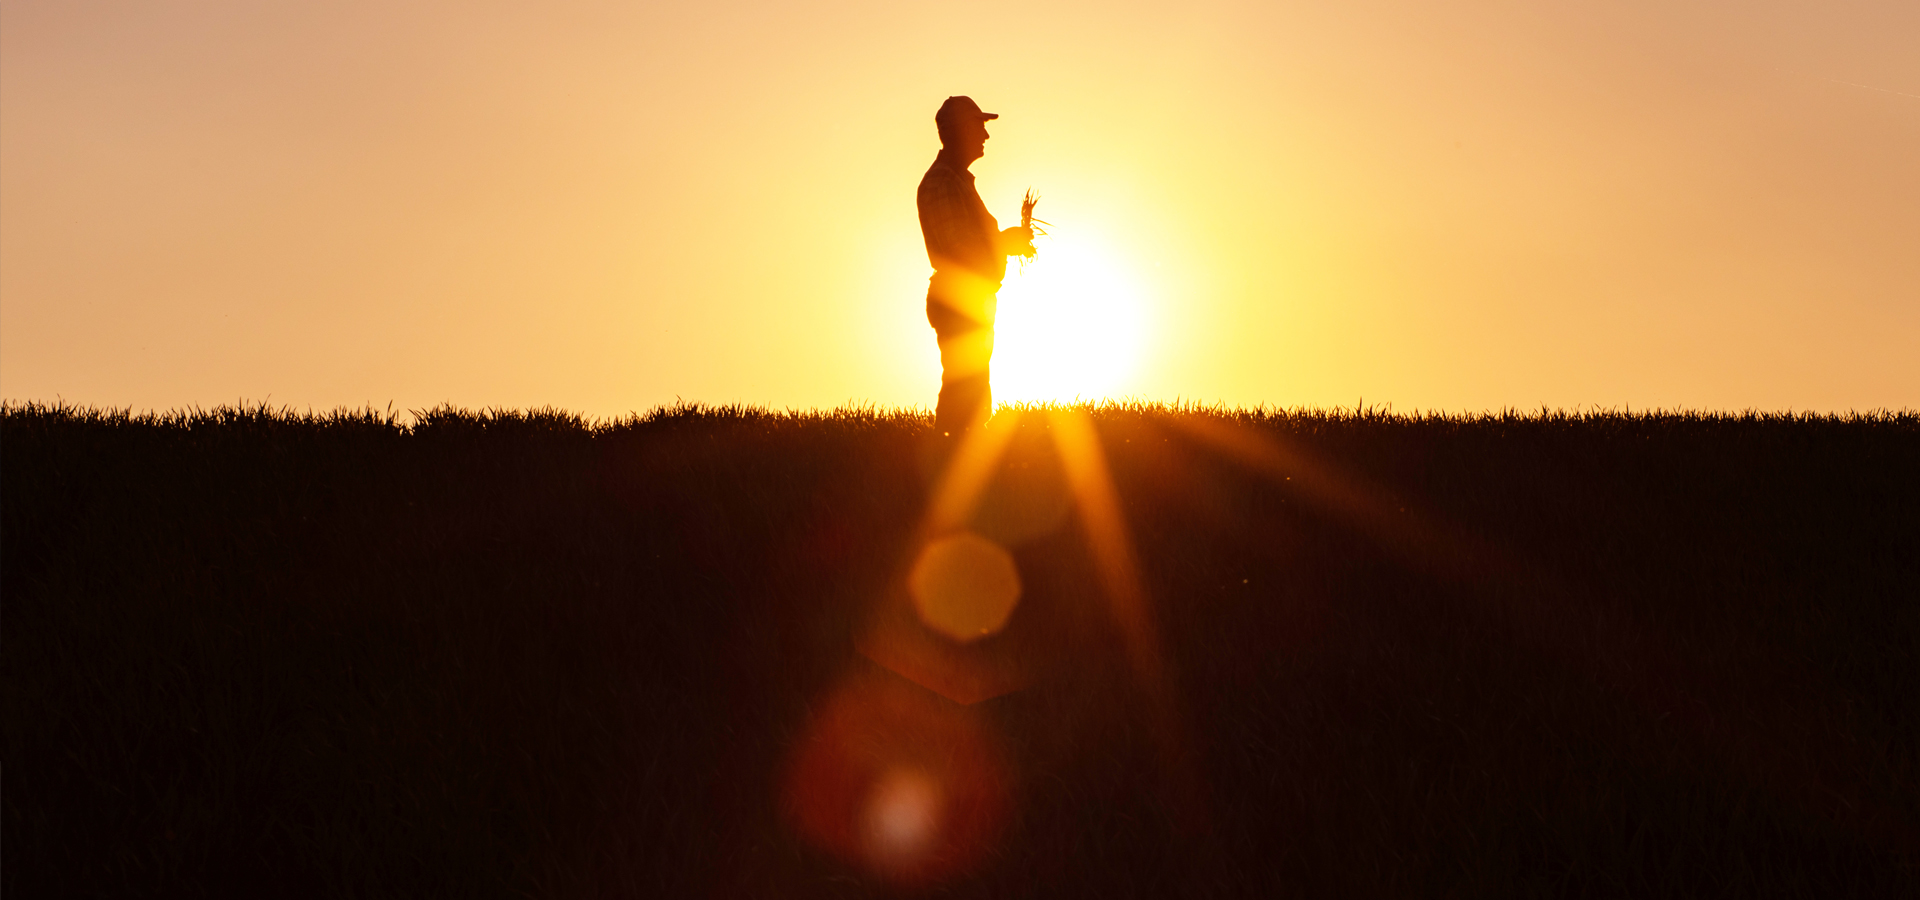 Farmer standing in field at sunset